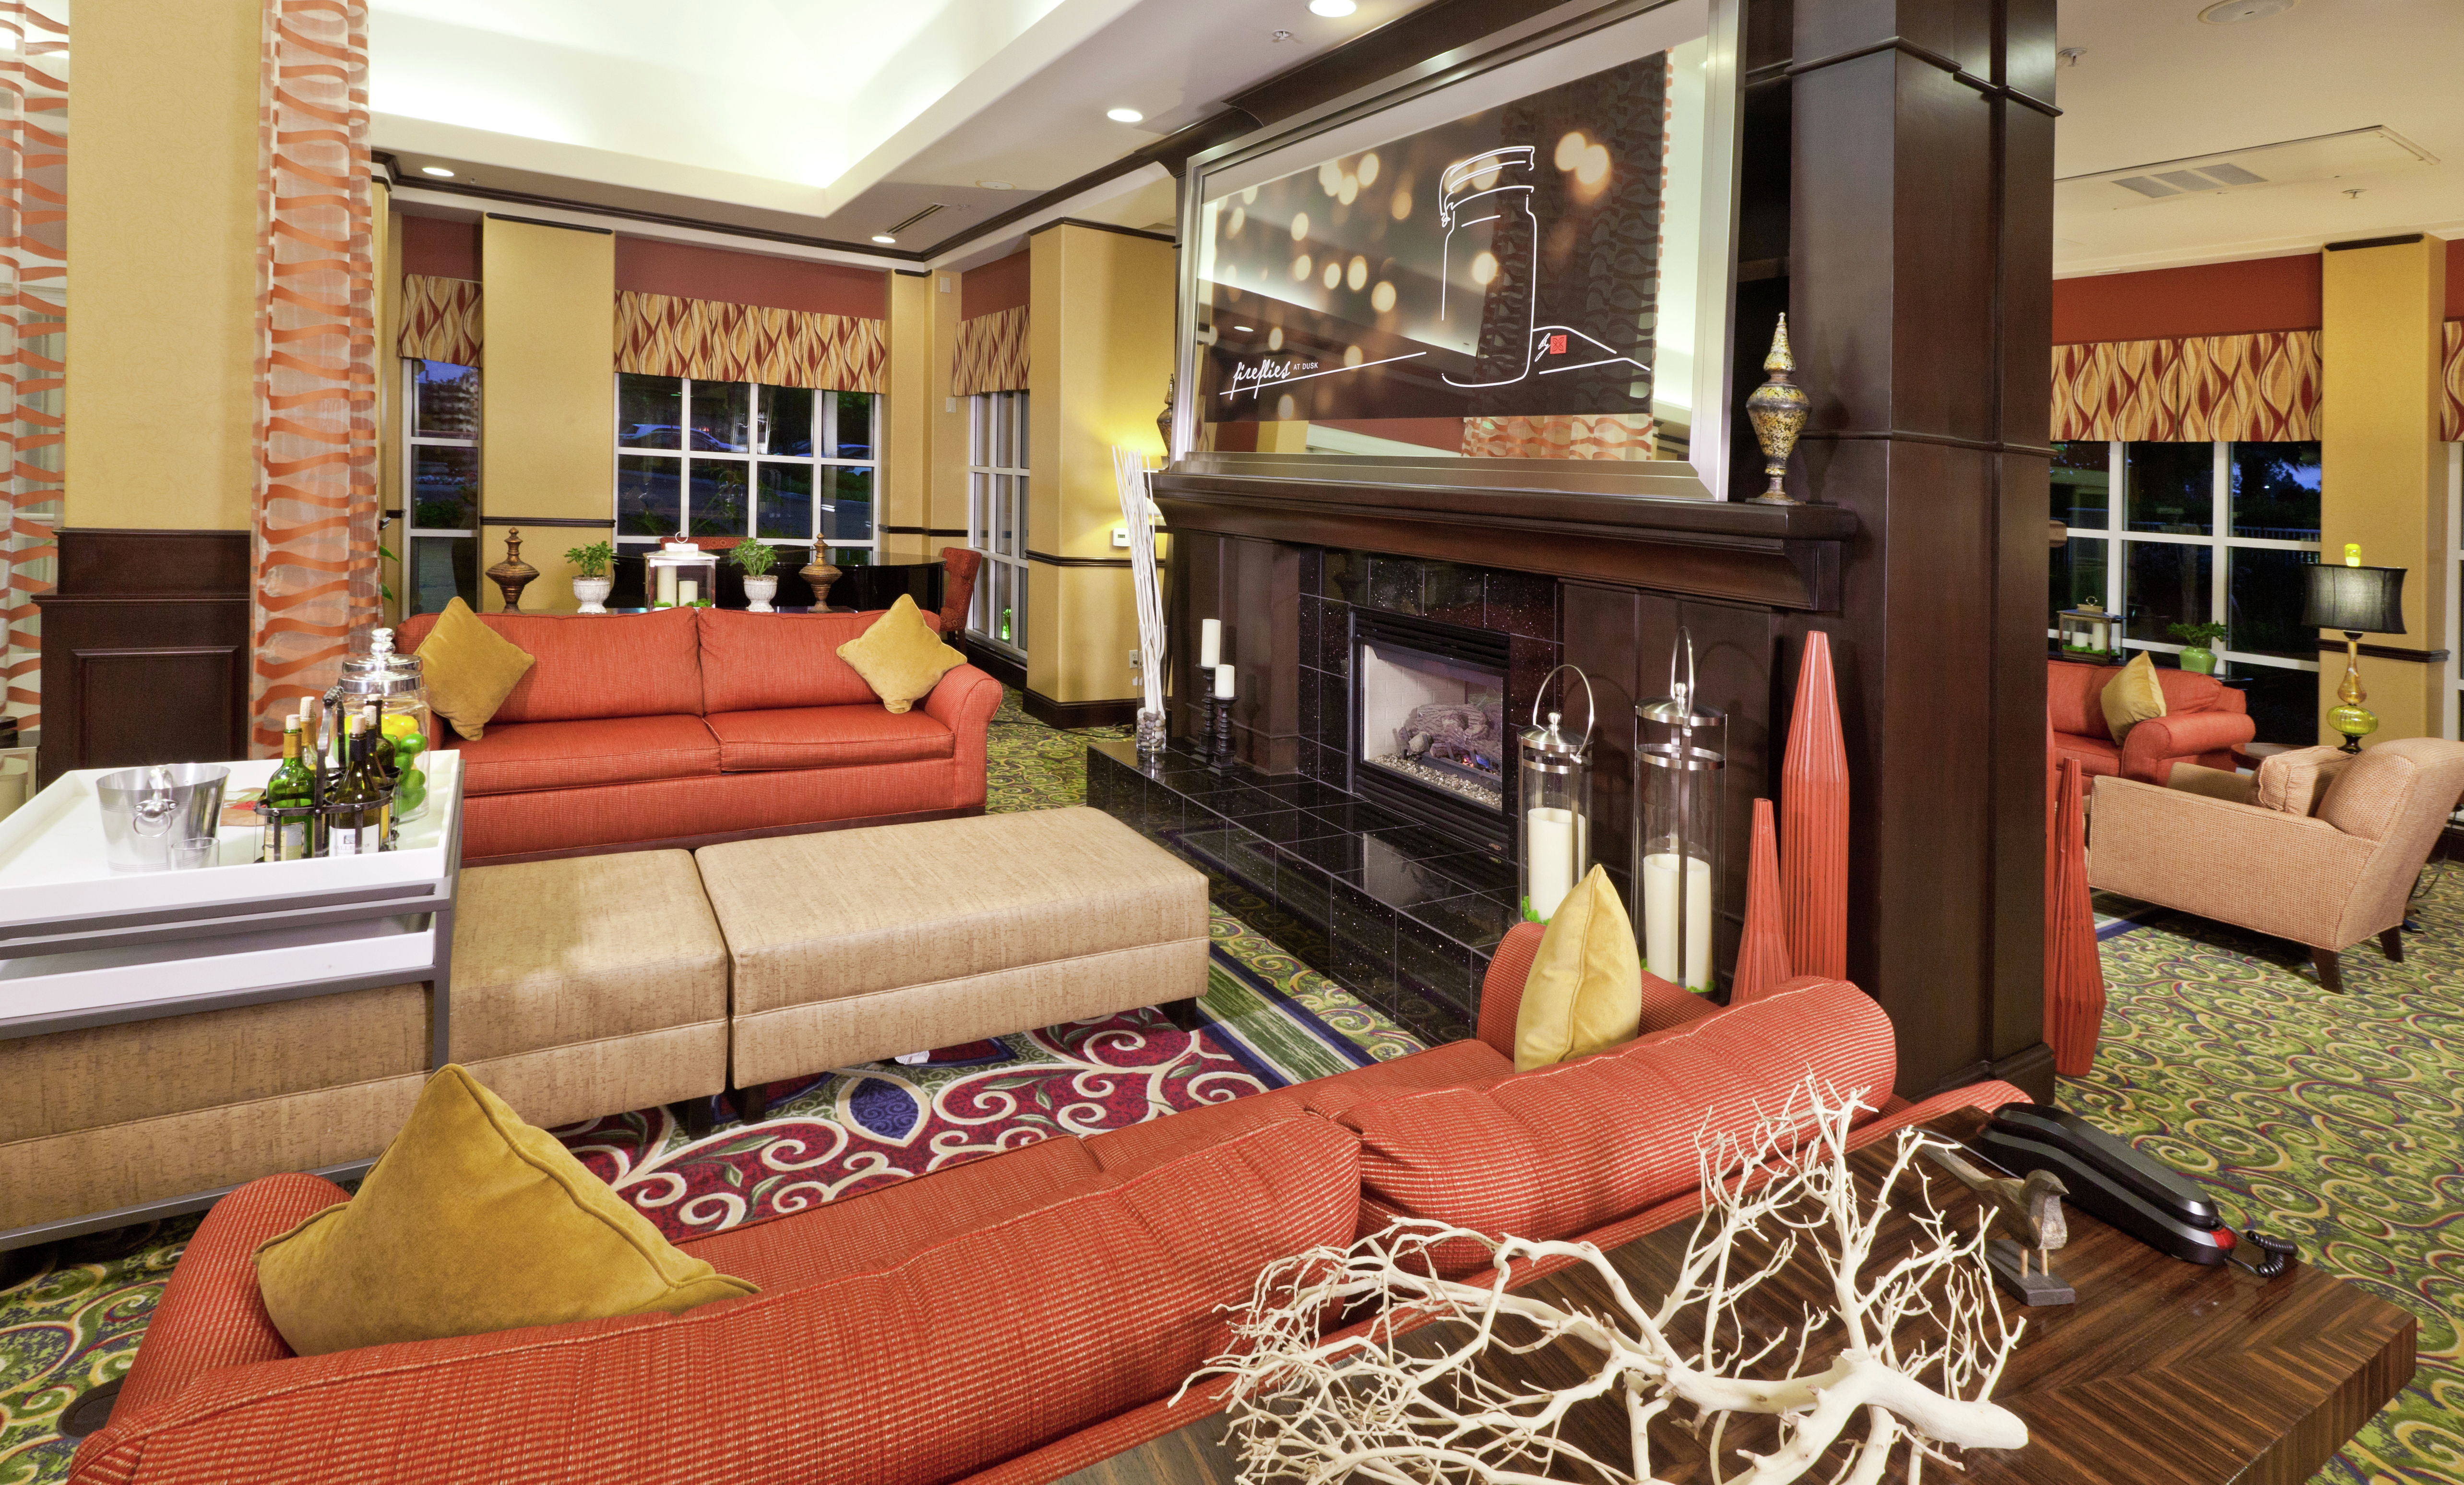 Lobby and Lounge Area with Fireplace 